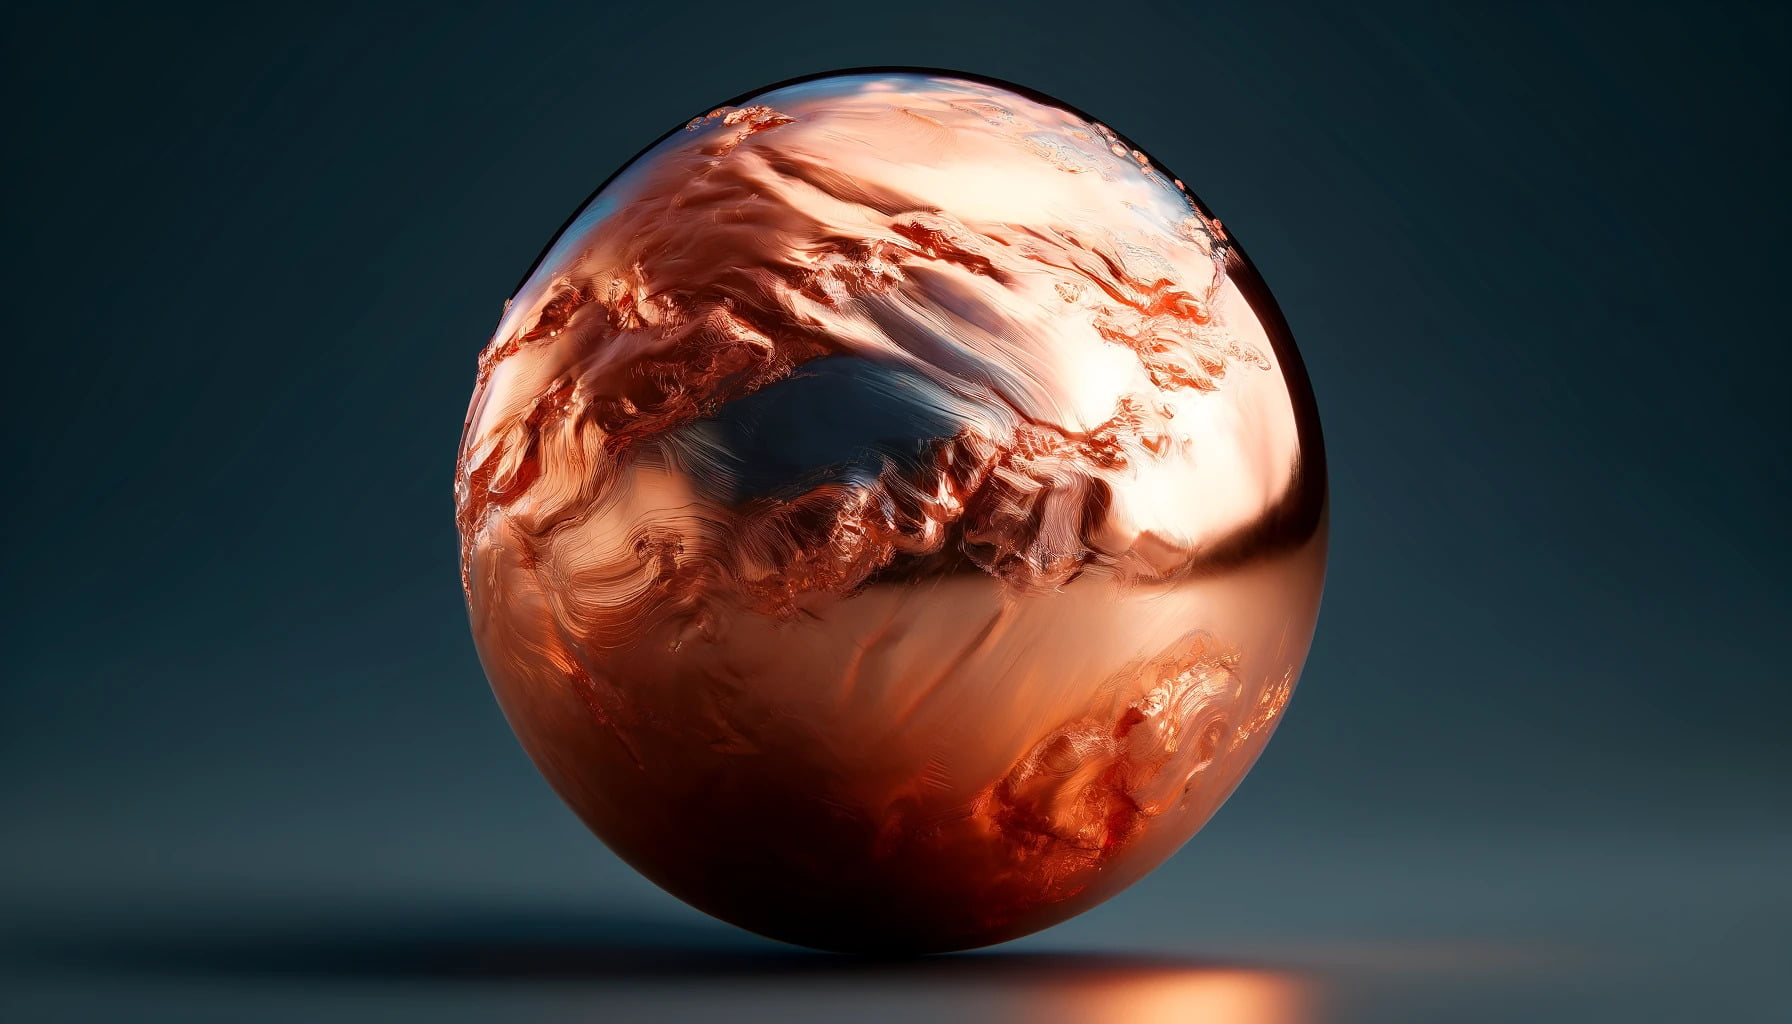 A photorealistic image of copper metal in a 3 dimensional sphere.